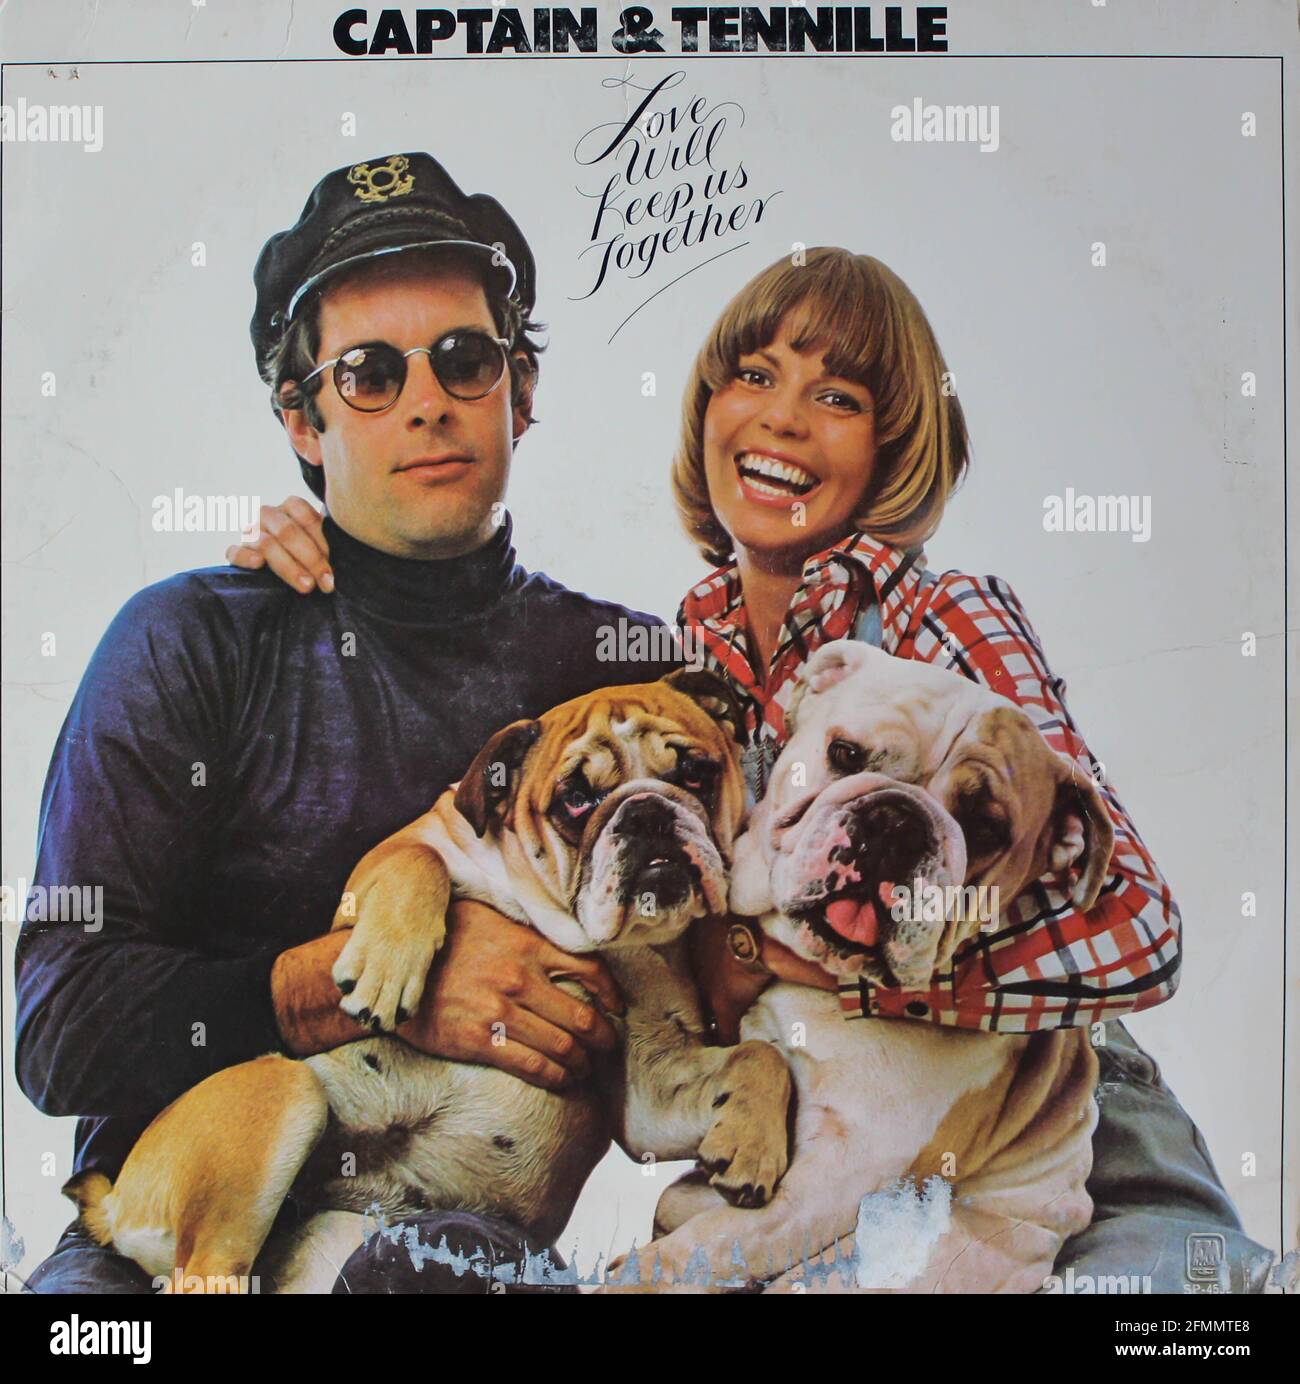 Love Will Keep Us Together is the first release by the duo Captain & Tennille on vinyl record LP music album. Album cover Stock Photo